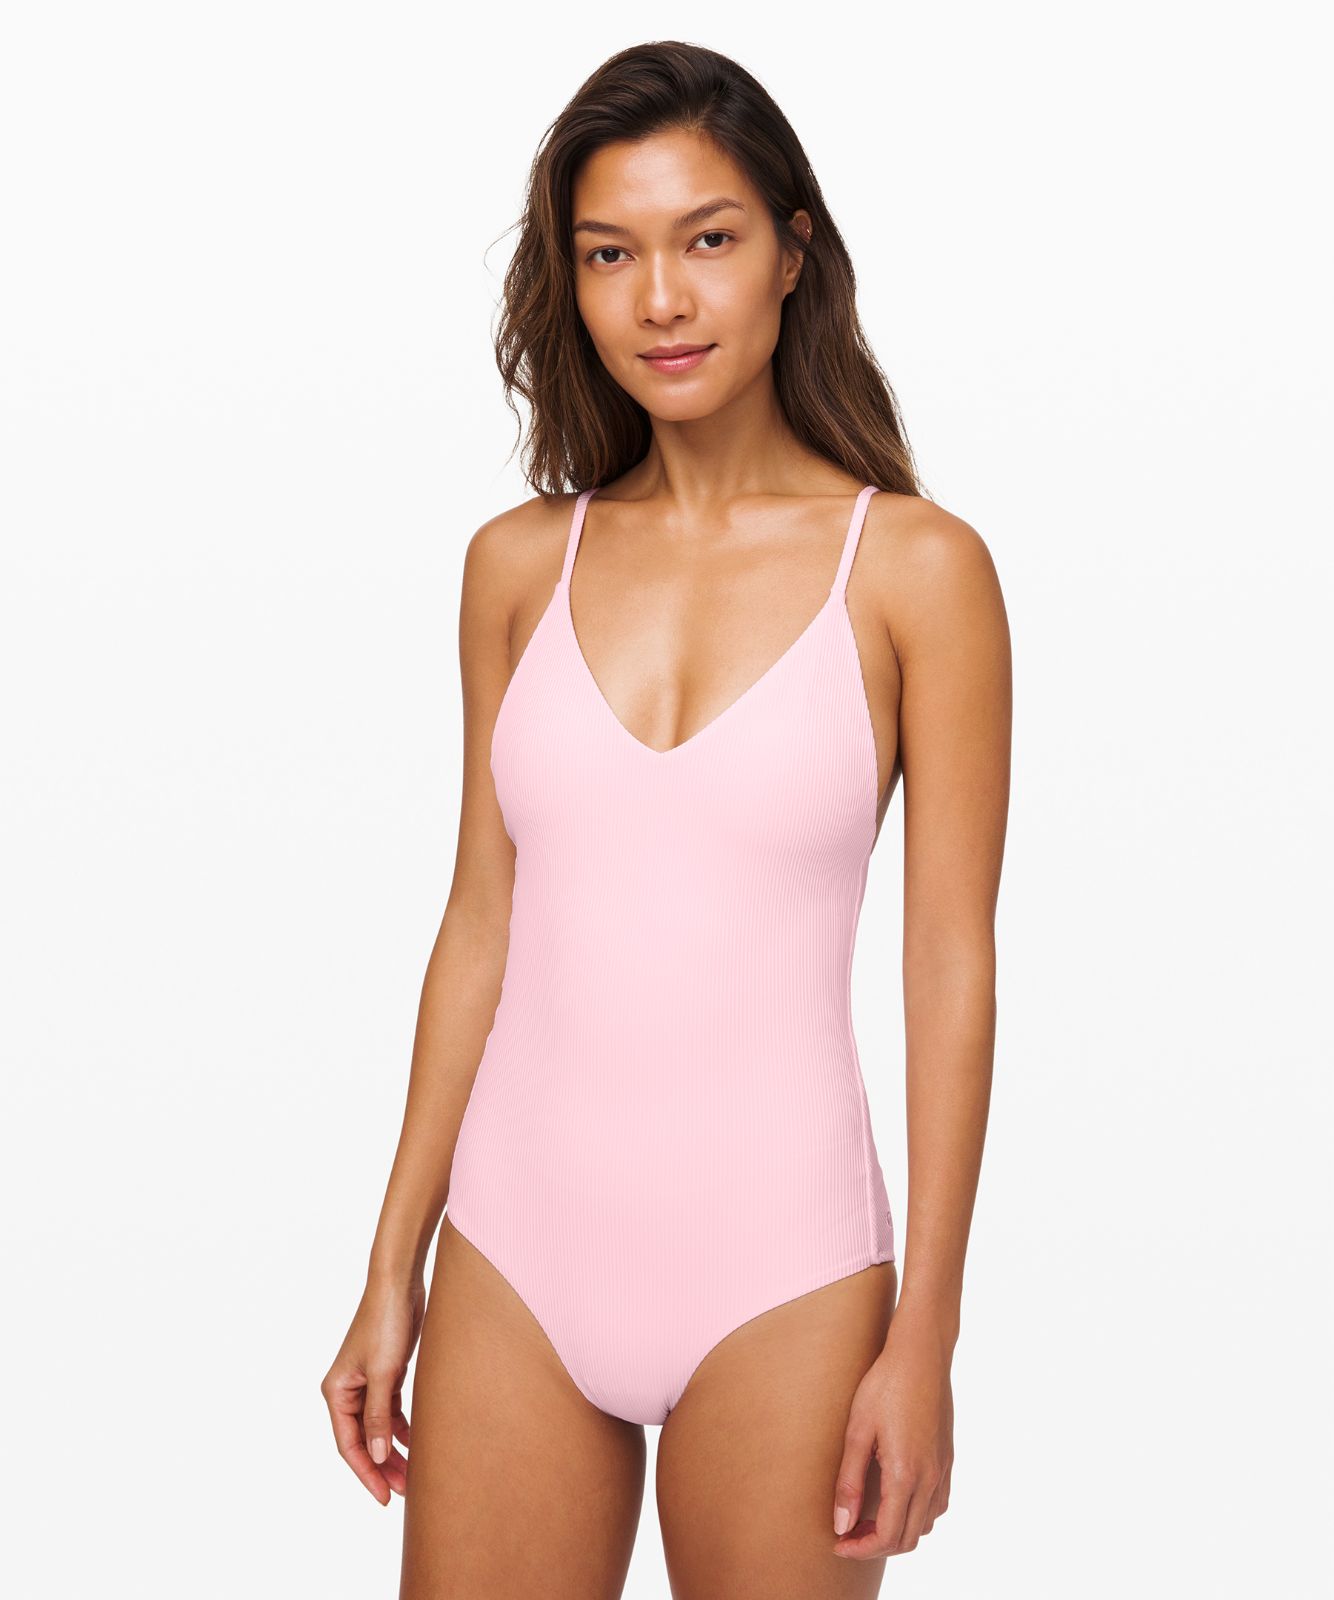 Poolside Pause Med One-Piece